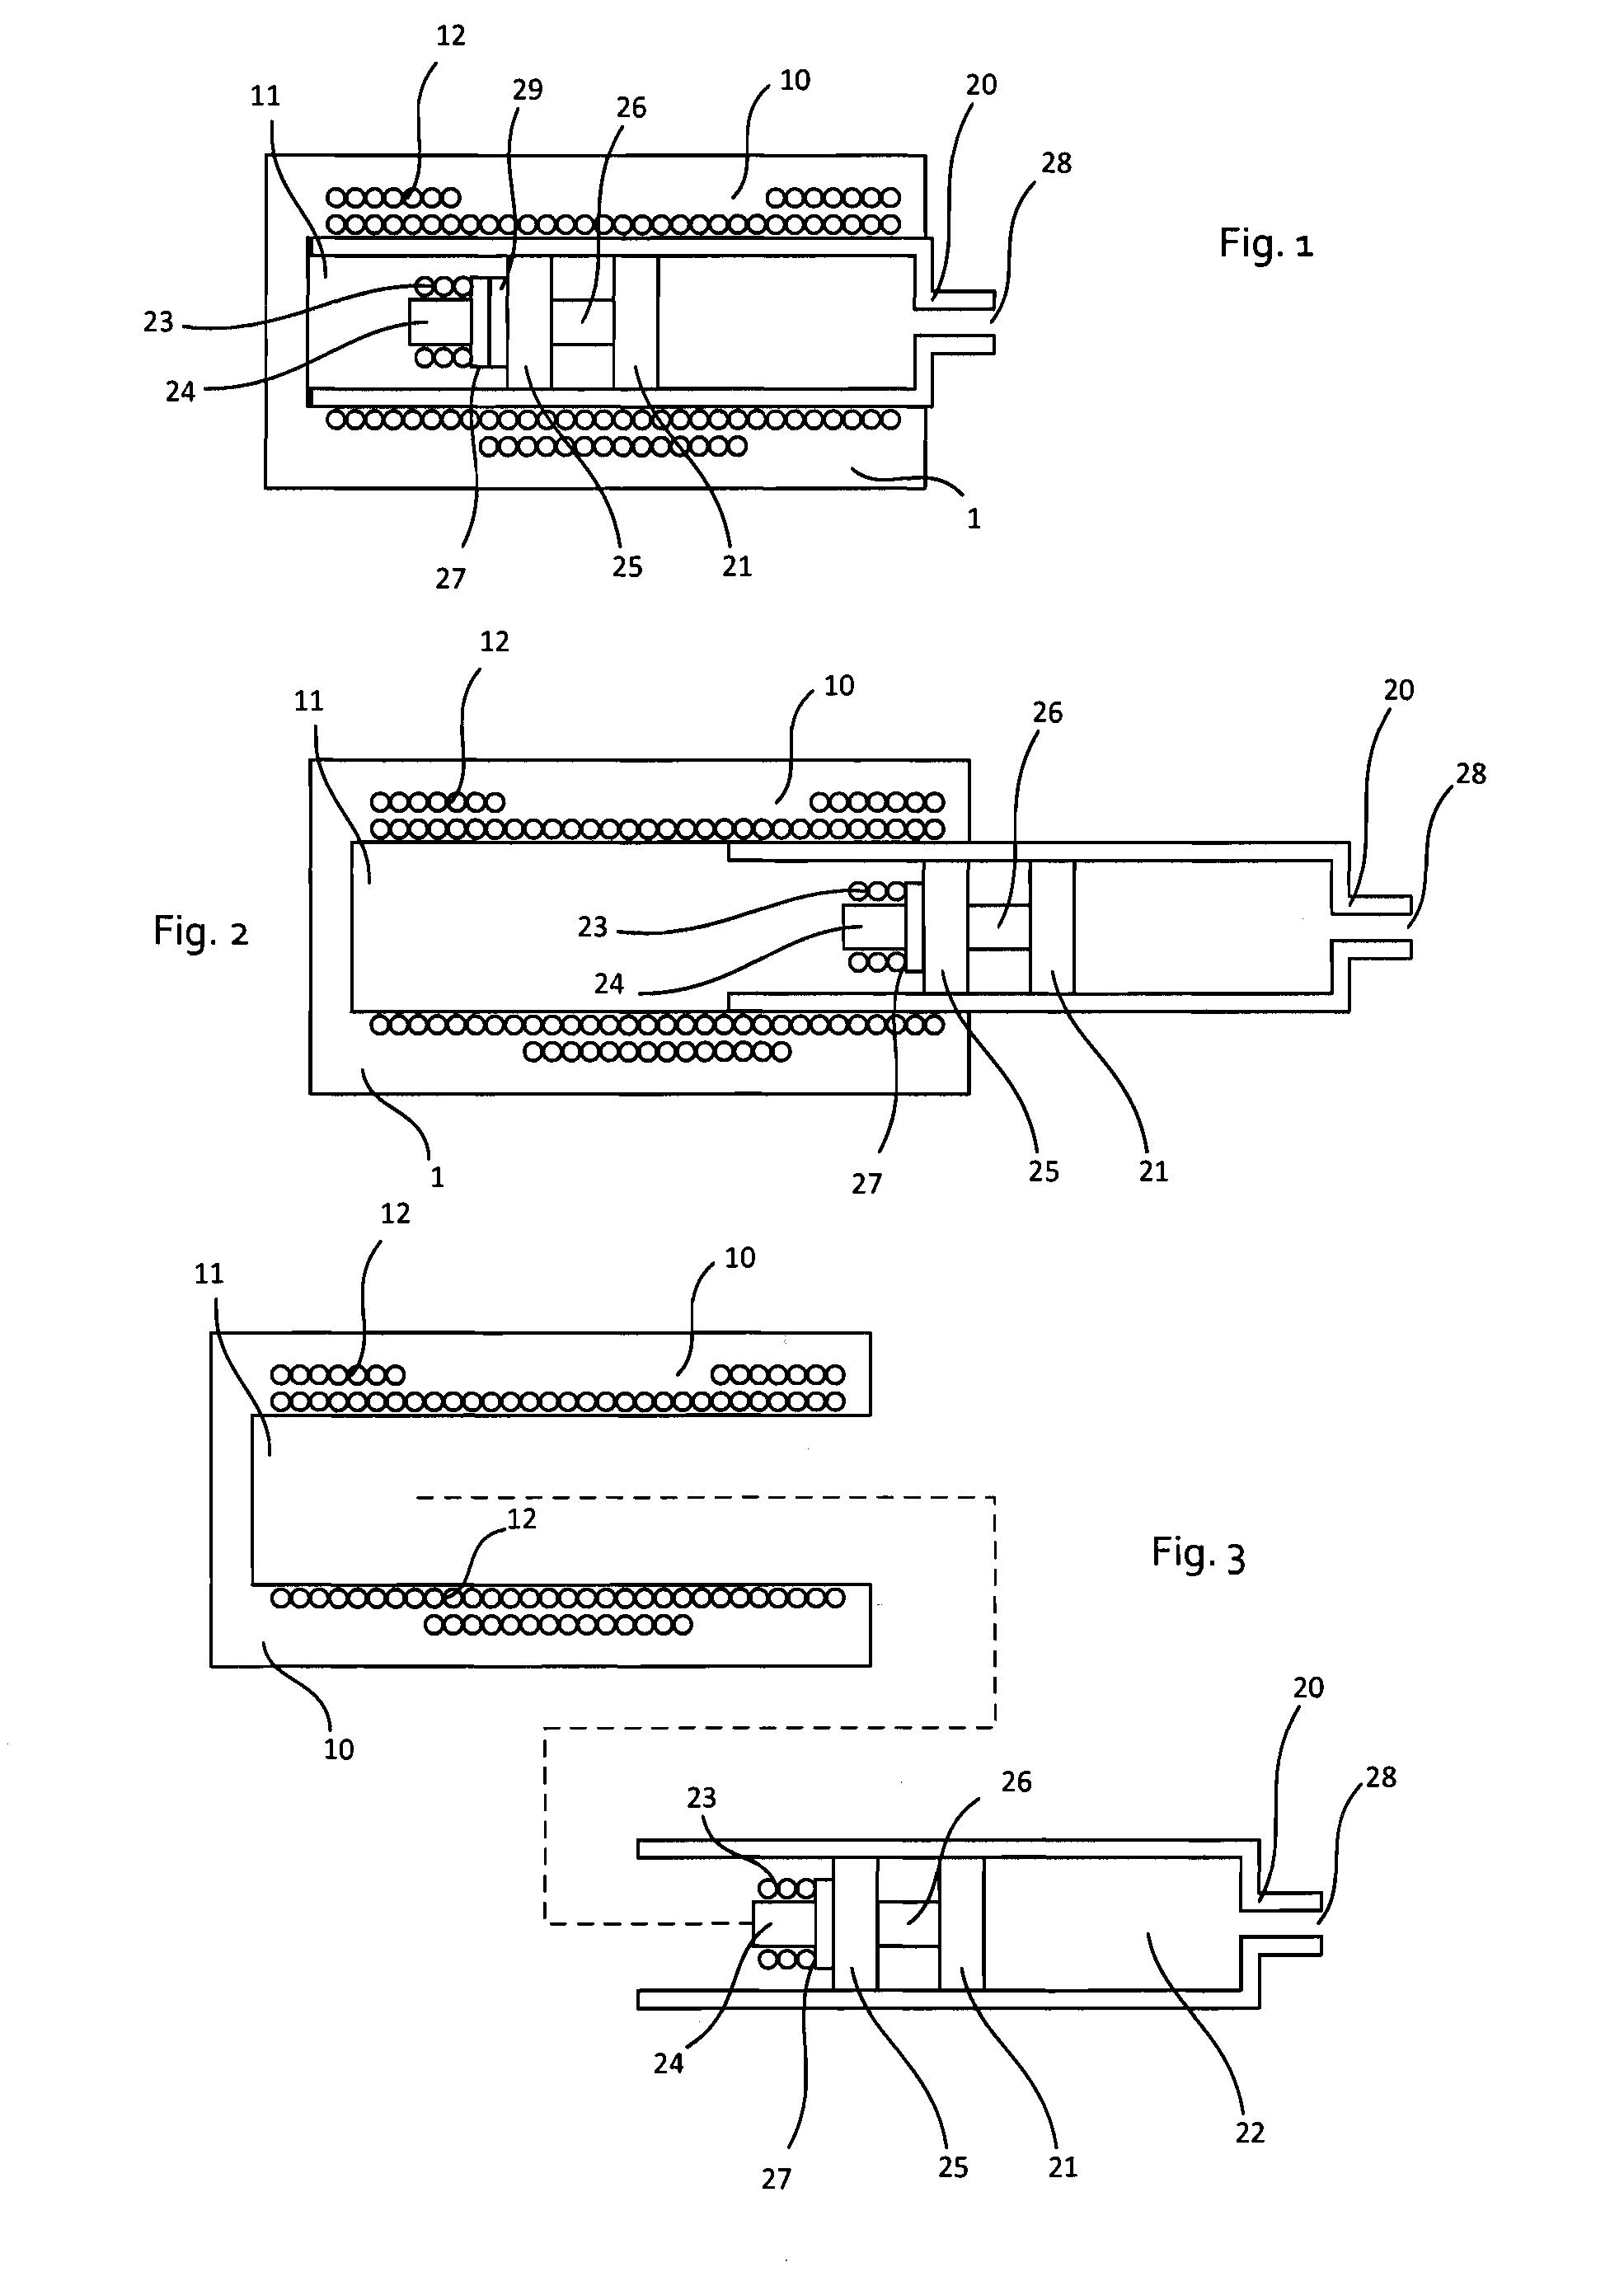 Inductively operated fluid dispensing device